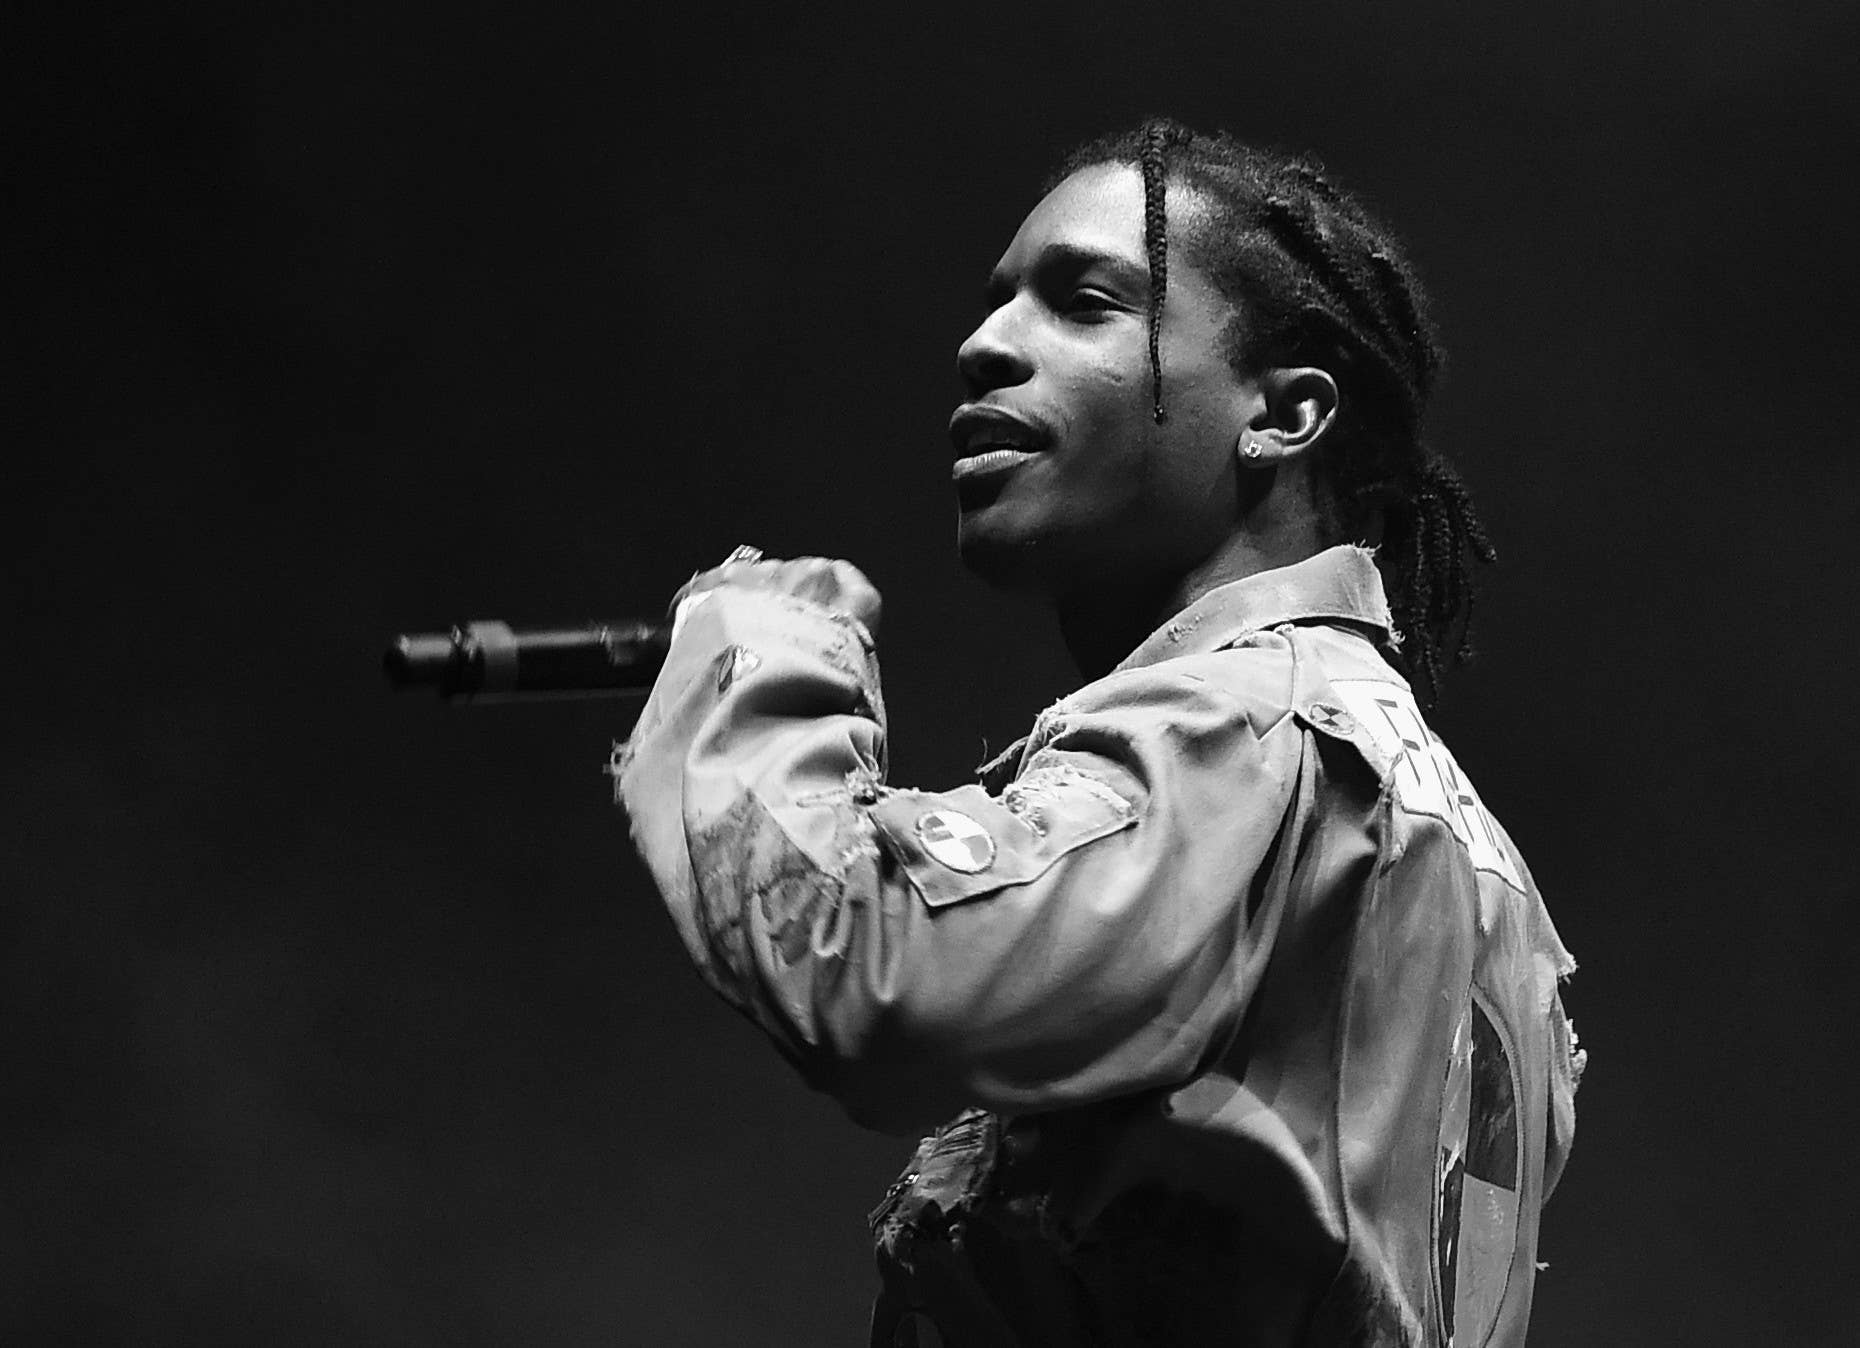 Wait, did we just get an early look at A$AP Rocky's Vans collaboration?